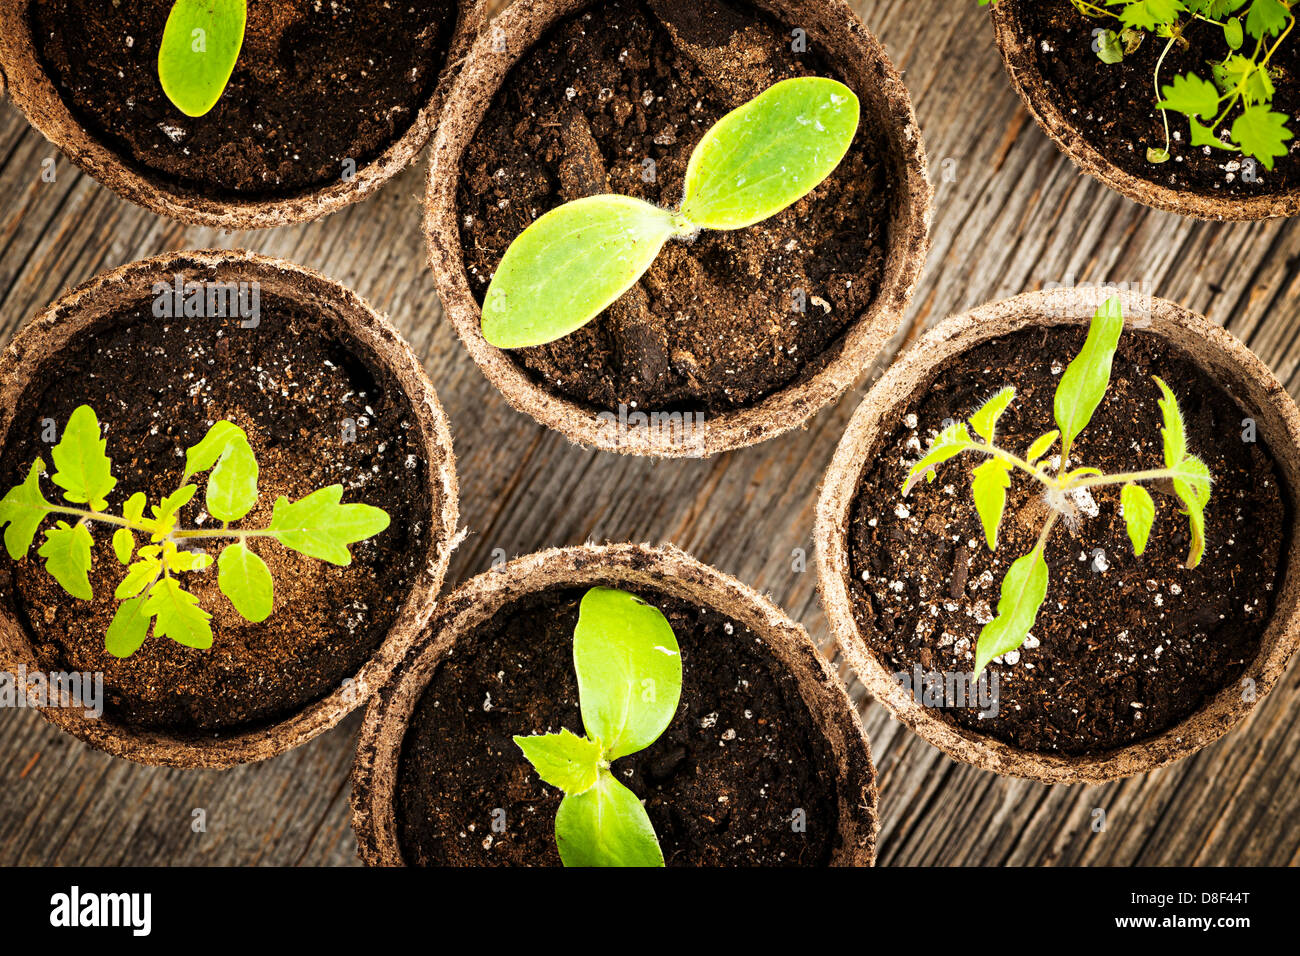 Potted seedlings growing in biodegradable peat moss pots from above Stock Photo